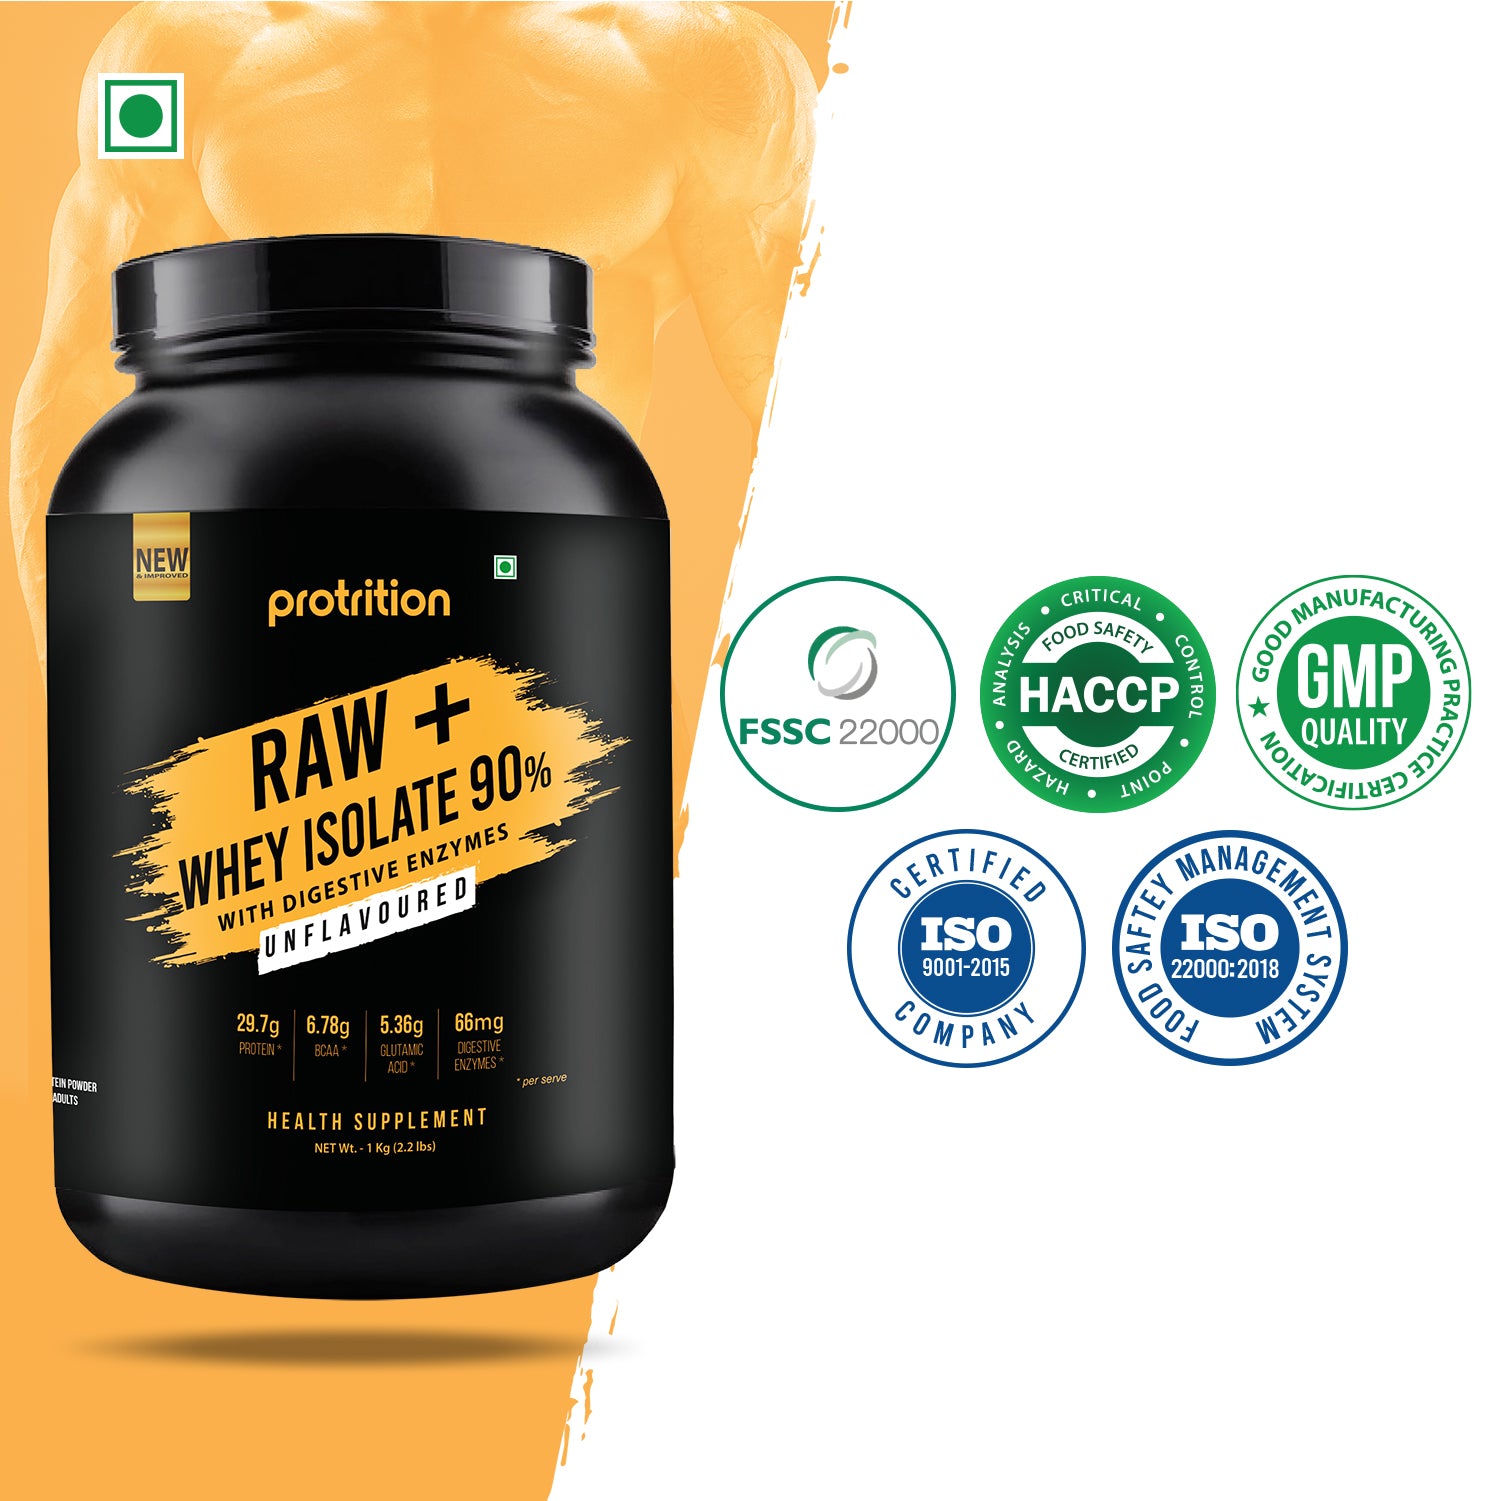 Protrition Raw+Whey Protein Isolate 90%, Unflavoured, 1Kg